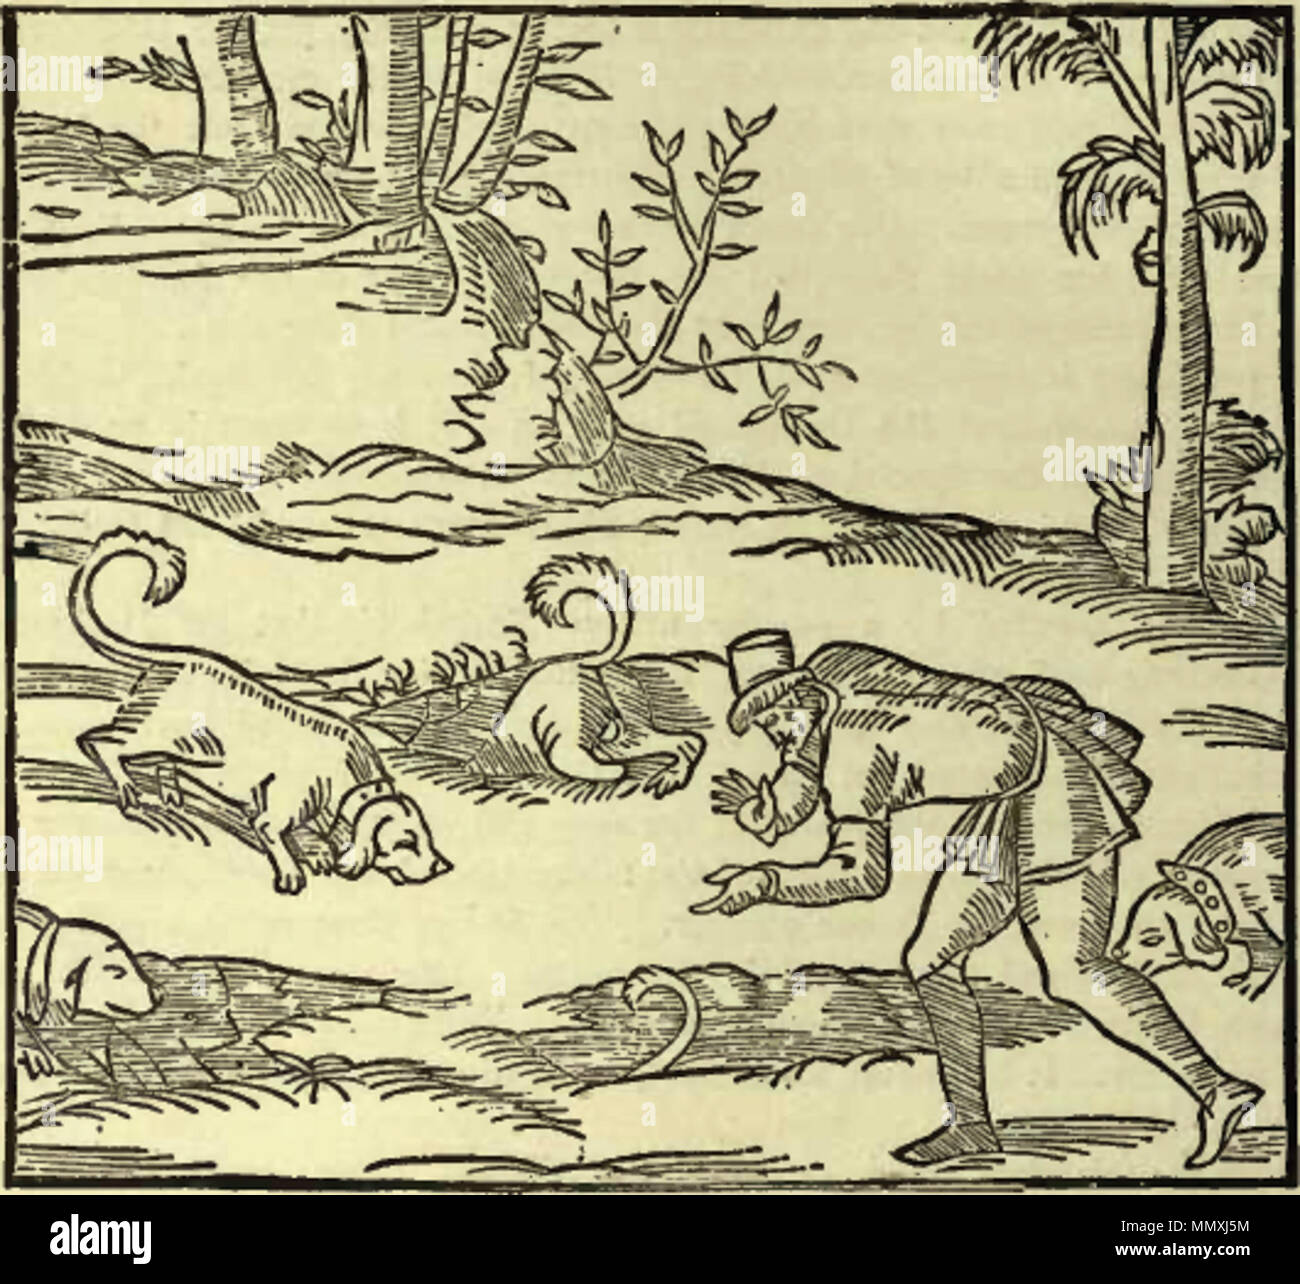 . English: first mention of a 'basset' dog in La Venerie, an illustrated hunting text written by Jacques du Fouilloux  . 1560. Jacques du Fouilloux Fouilloux Basset Stock Photo